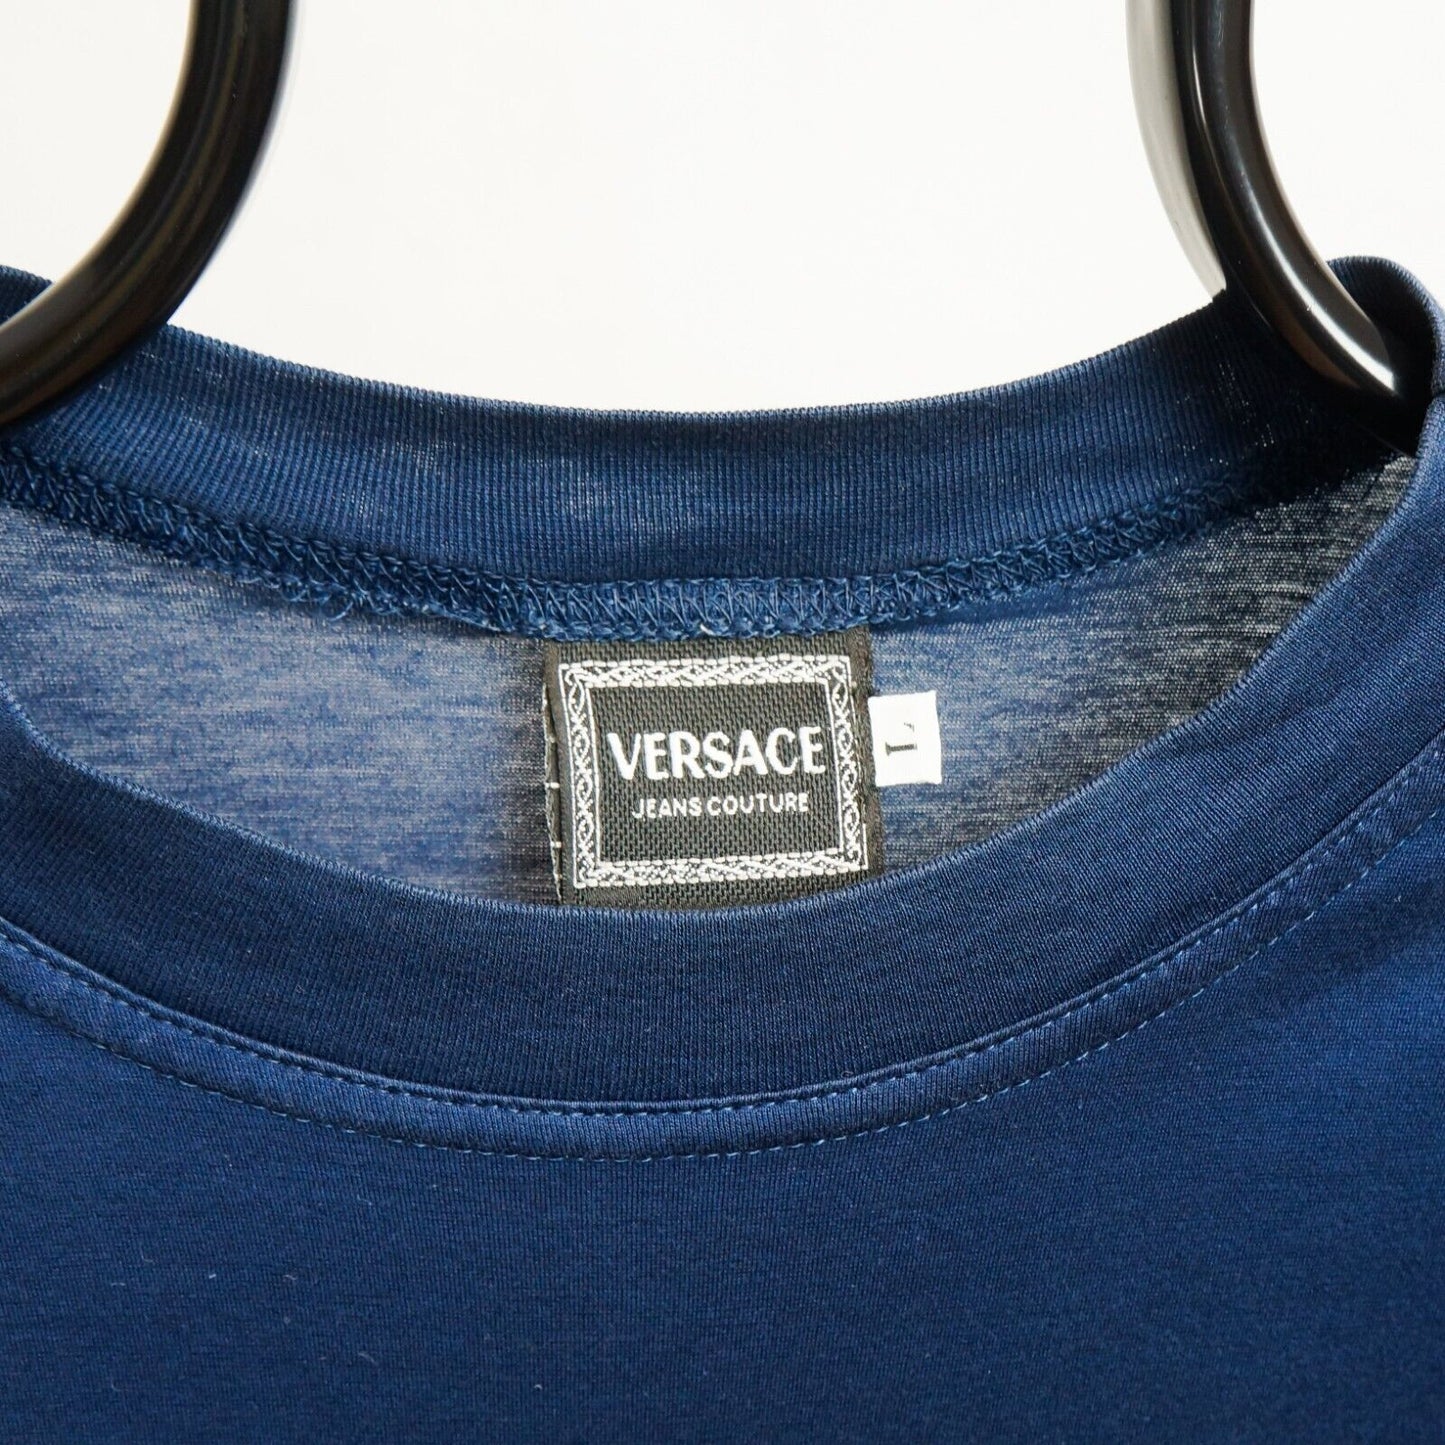 VERSACE Jeans Couture Vintage Tee Shirt Blue 90s 00s